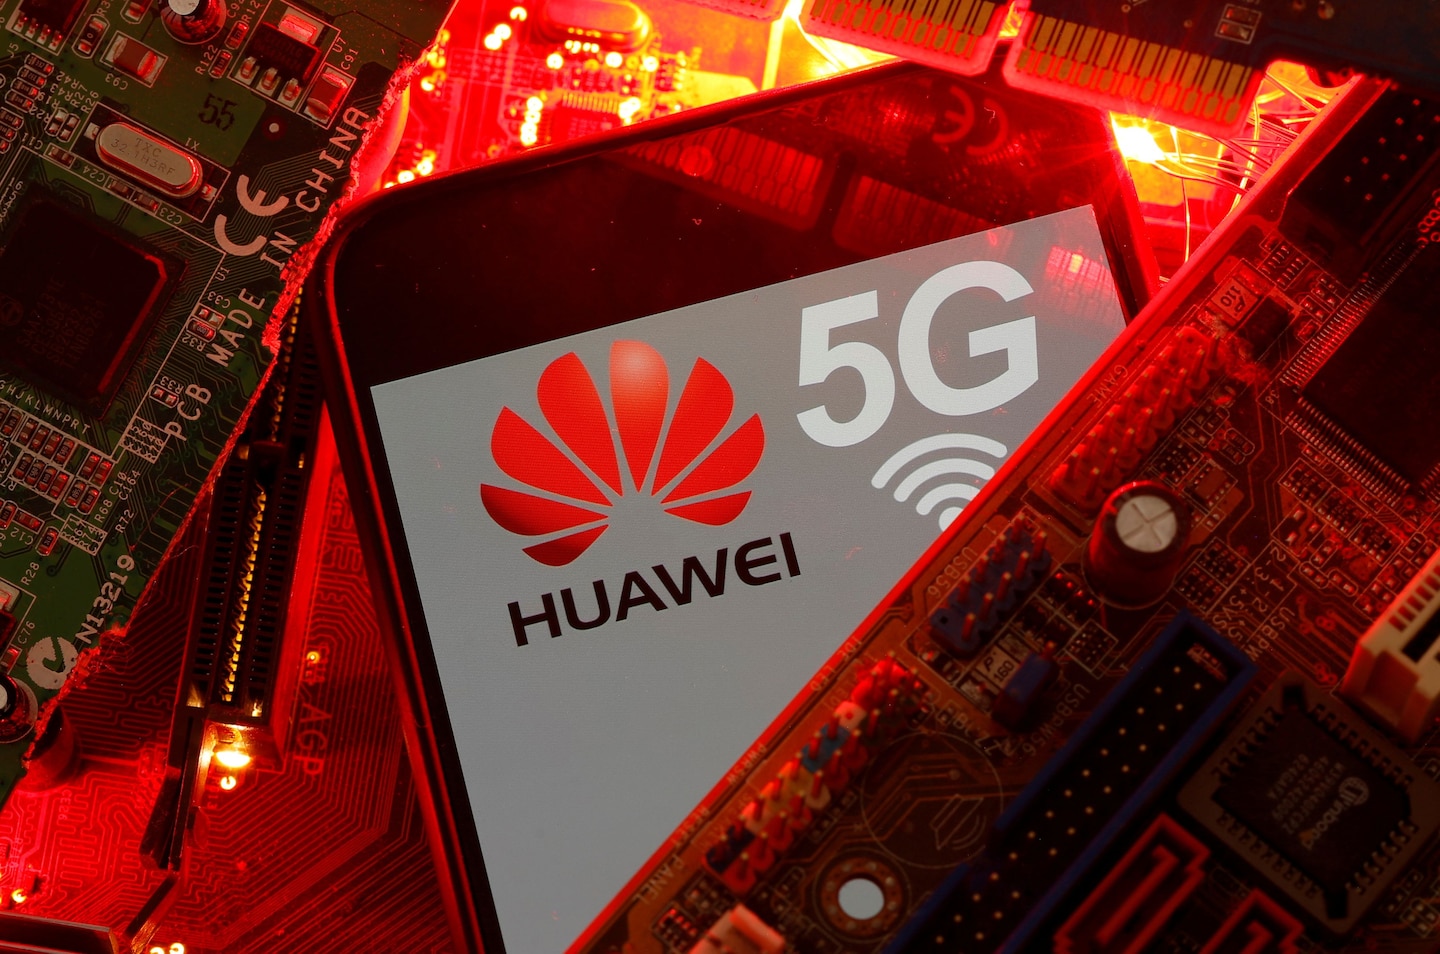 Britain bars Huawei from its 5G wireless networks, part of a growing shift away from the Chinese tech giant